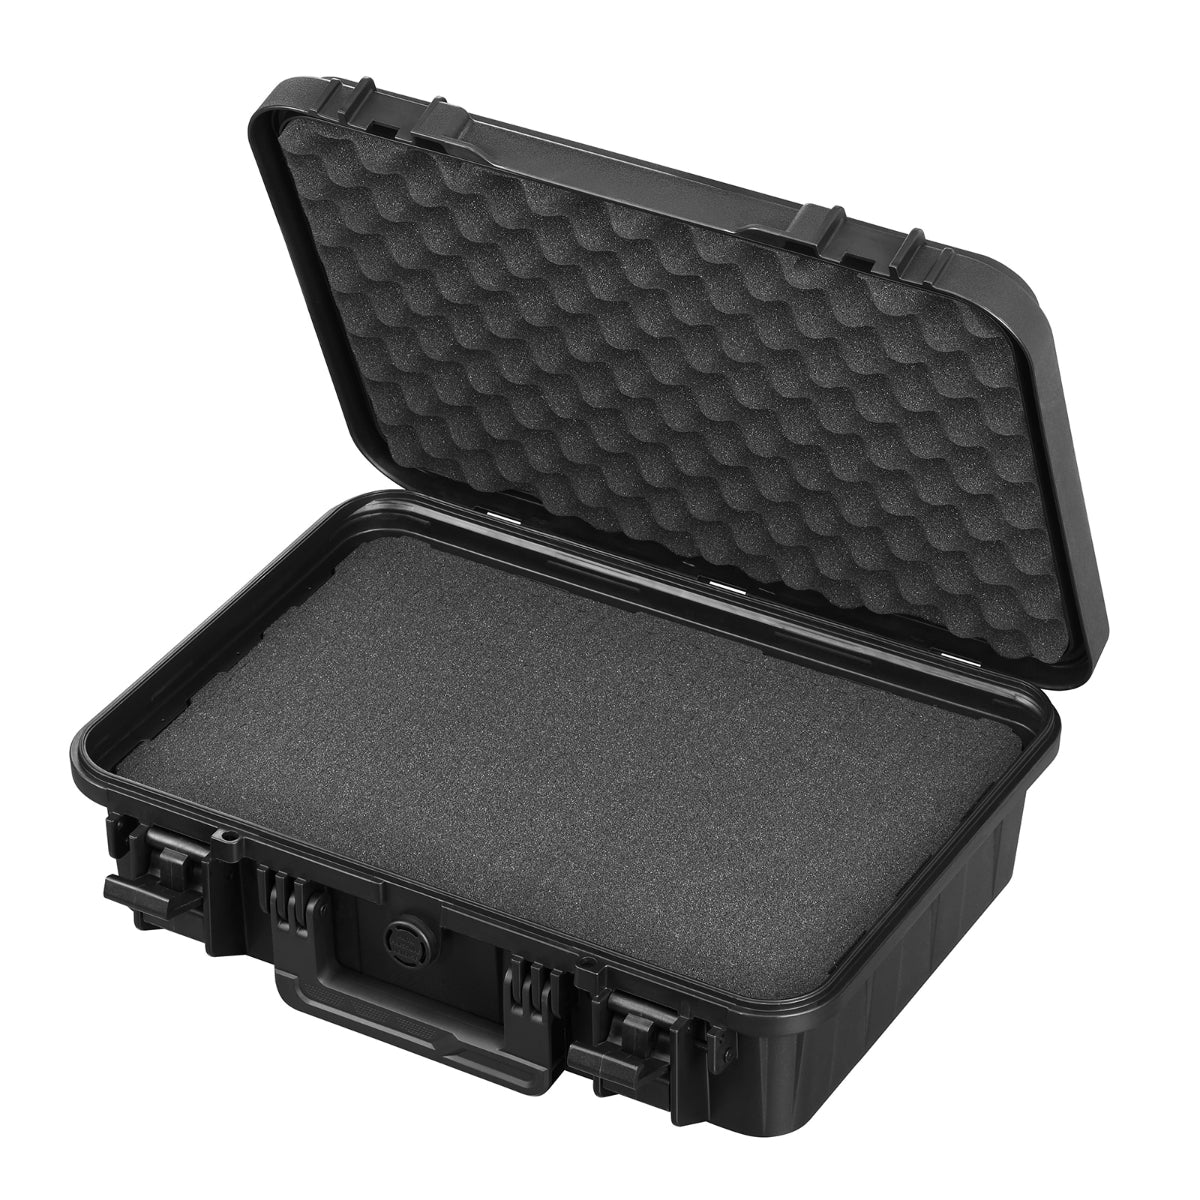 SP ECO 60S Black Carry Case, Cubed Foam, ID: L415xW280xH125mm